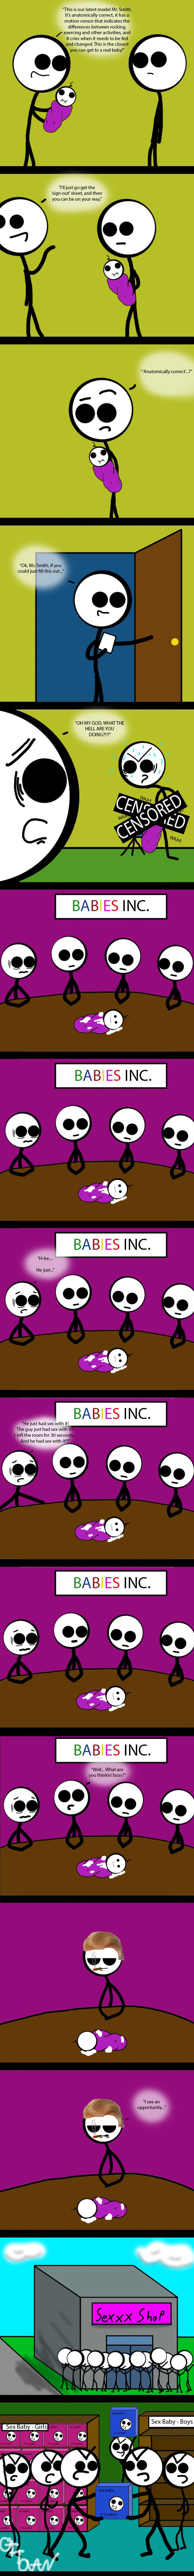 The Infamous Sex-Baby Comic